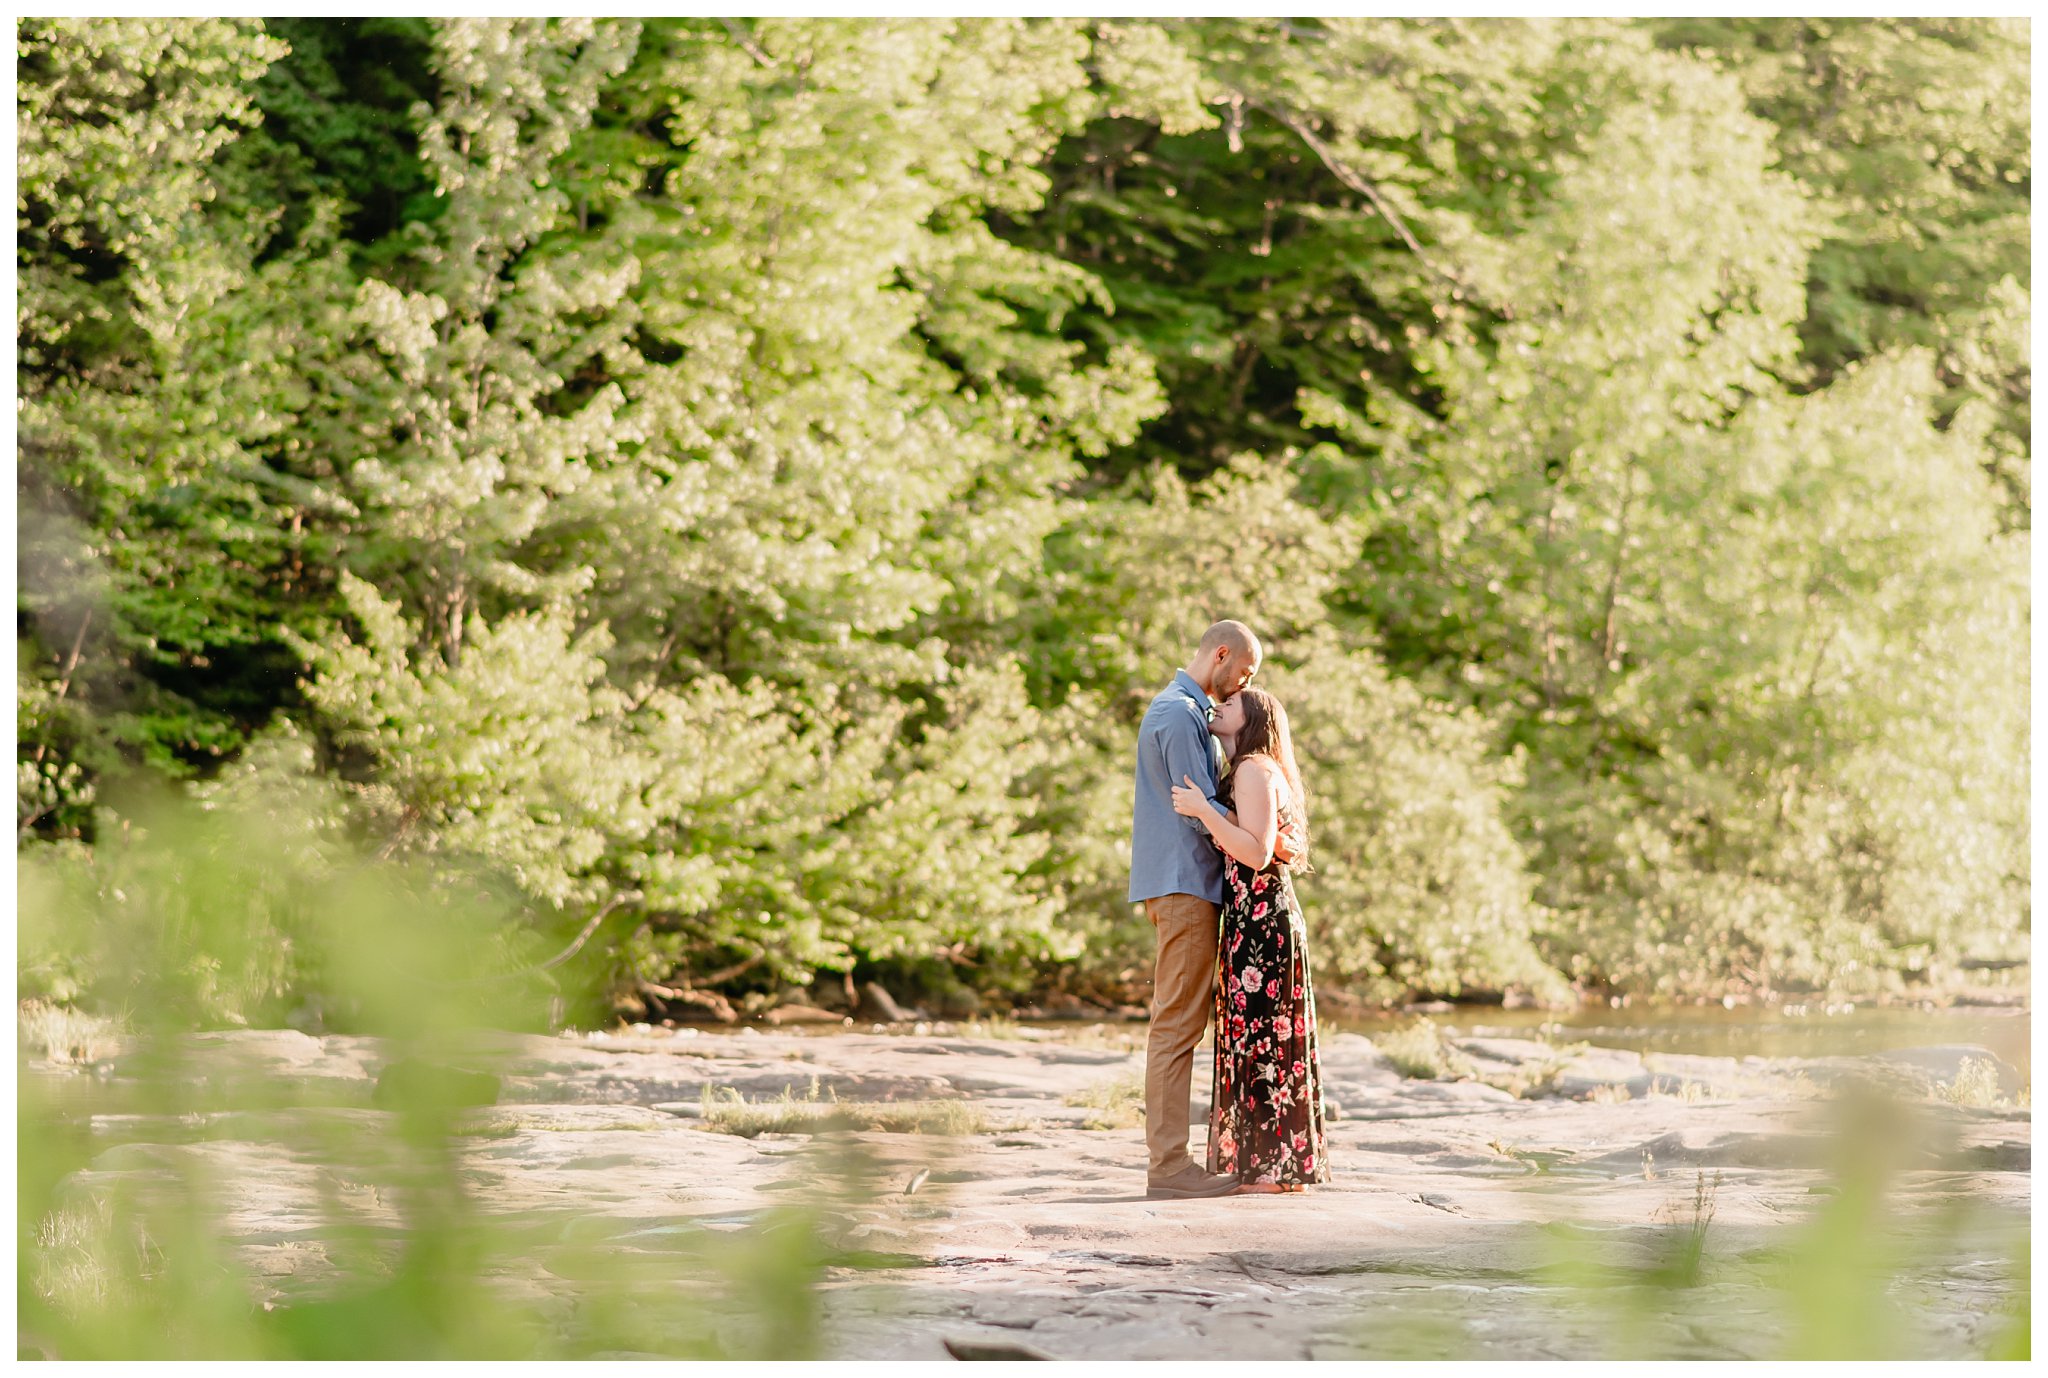 Salmon River Falls Engagement Session Joanna Young Photography_0013.jpg